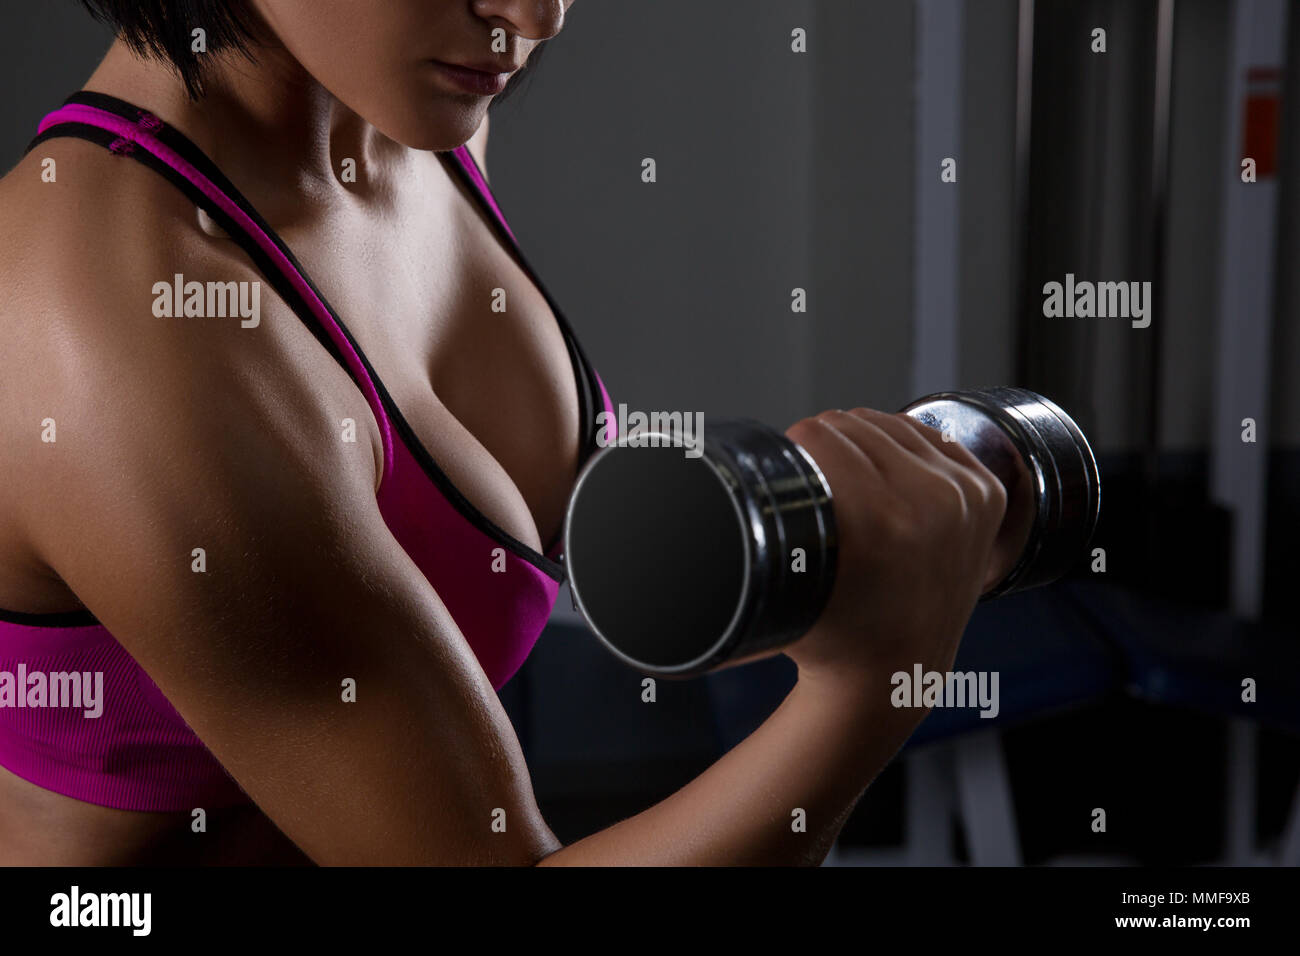 fitness model brunette holding weights on black background. athlete lifts a dumbbell. halthy concept Stock Photo